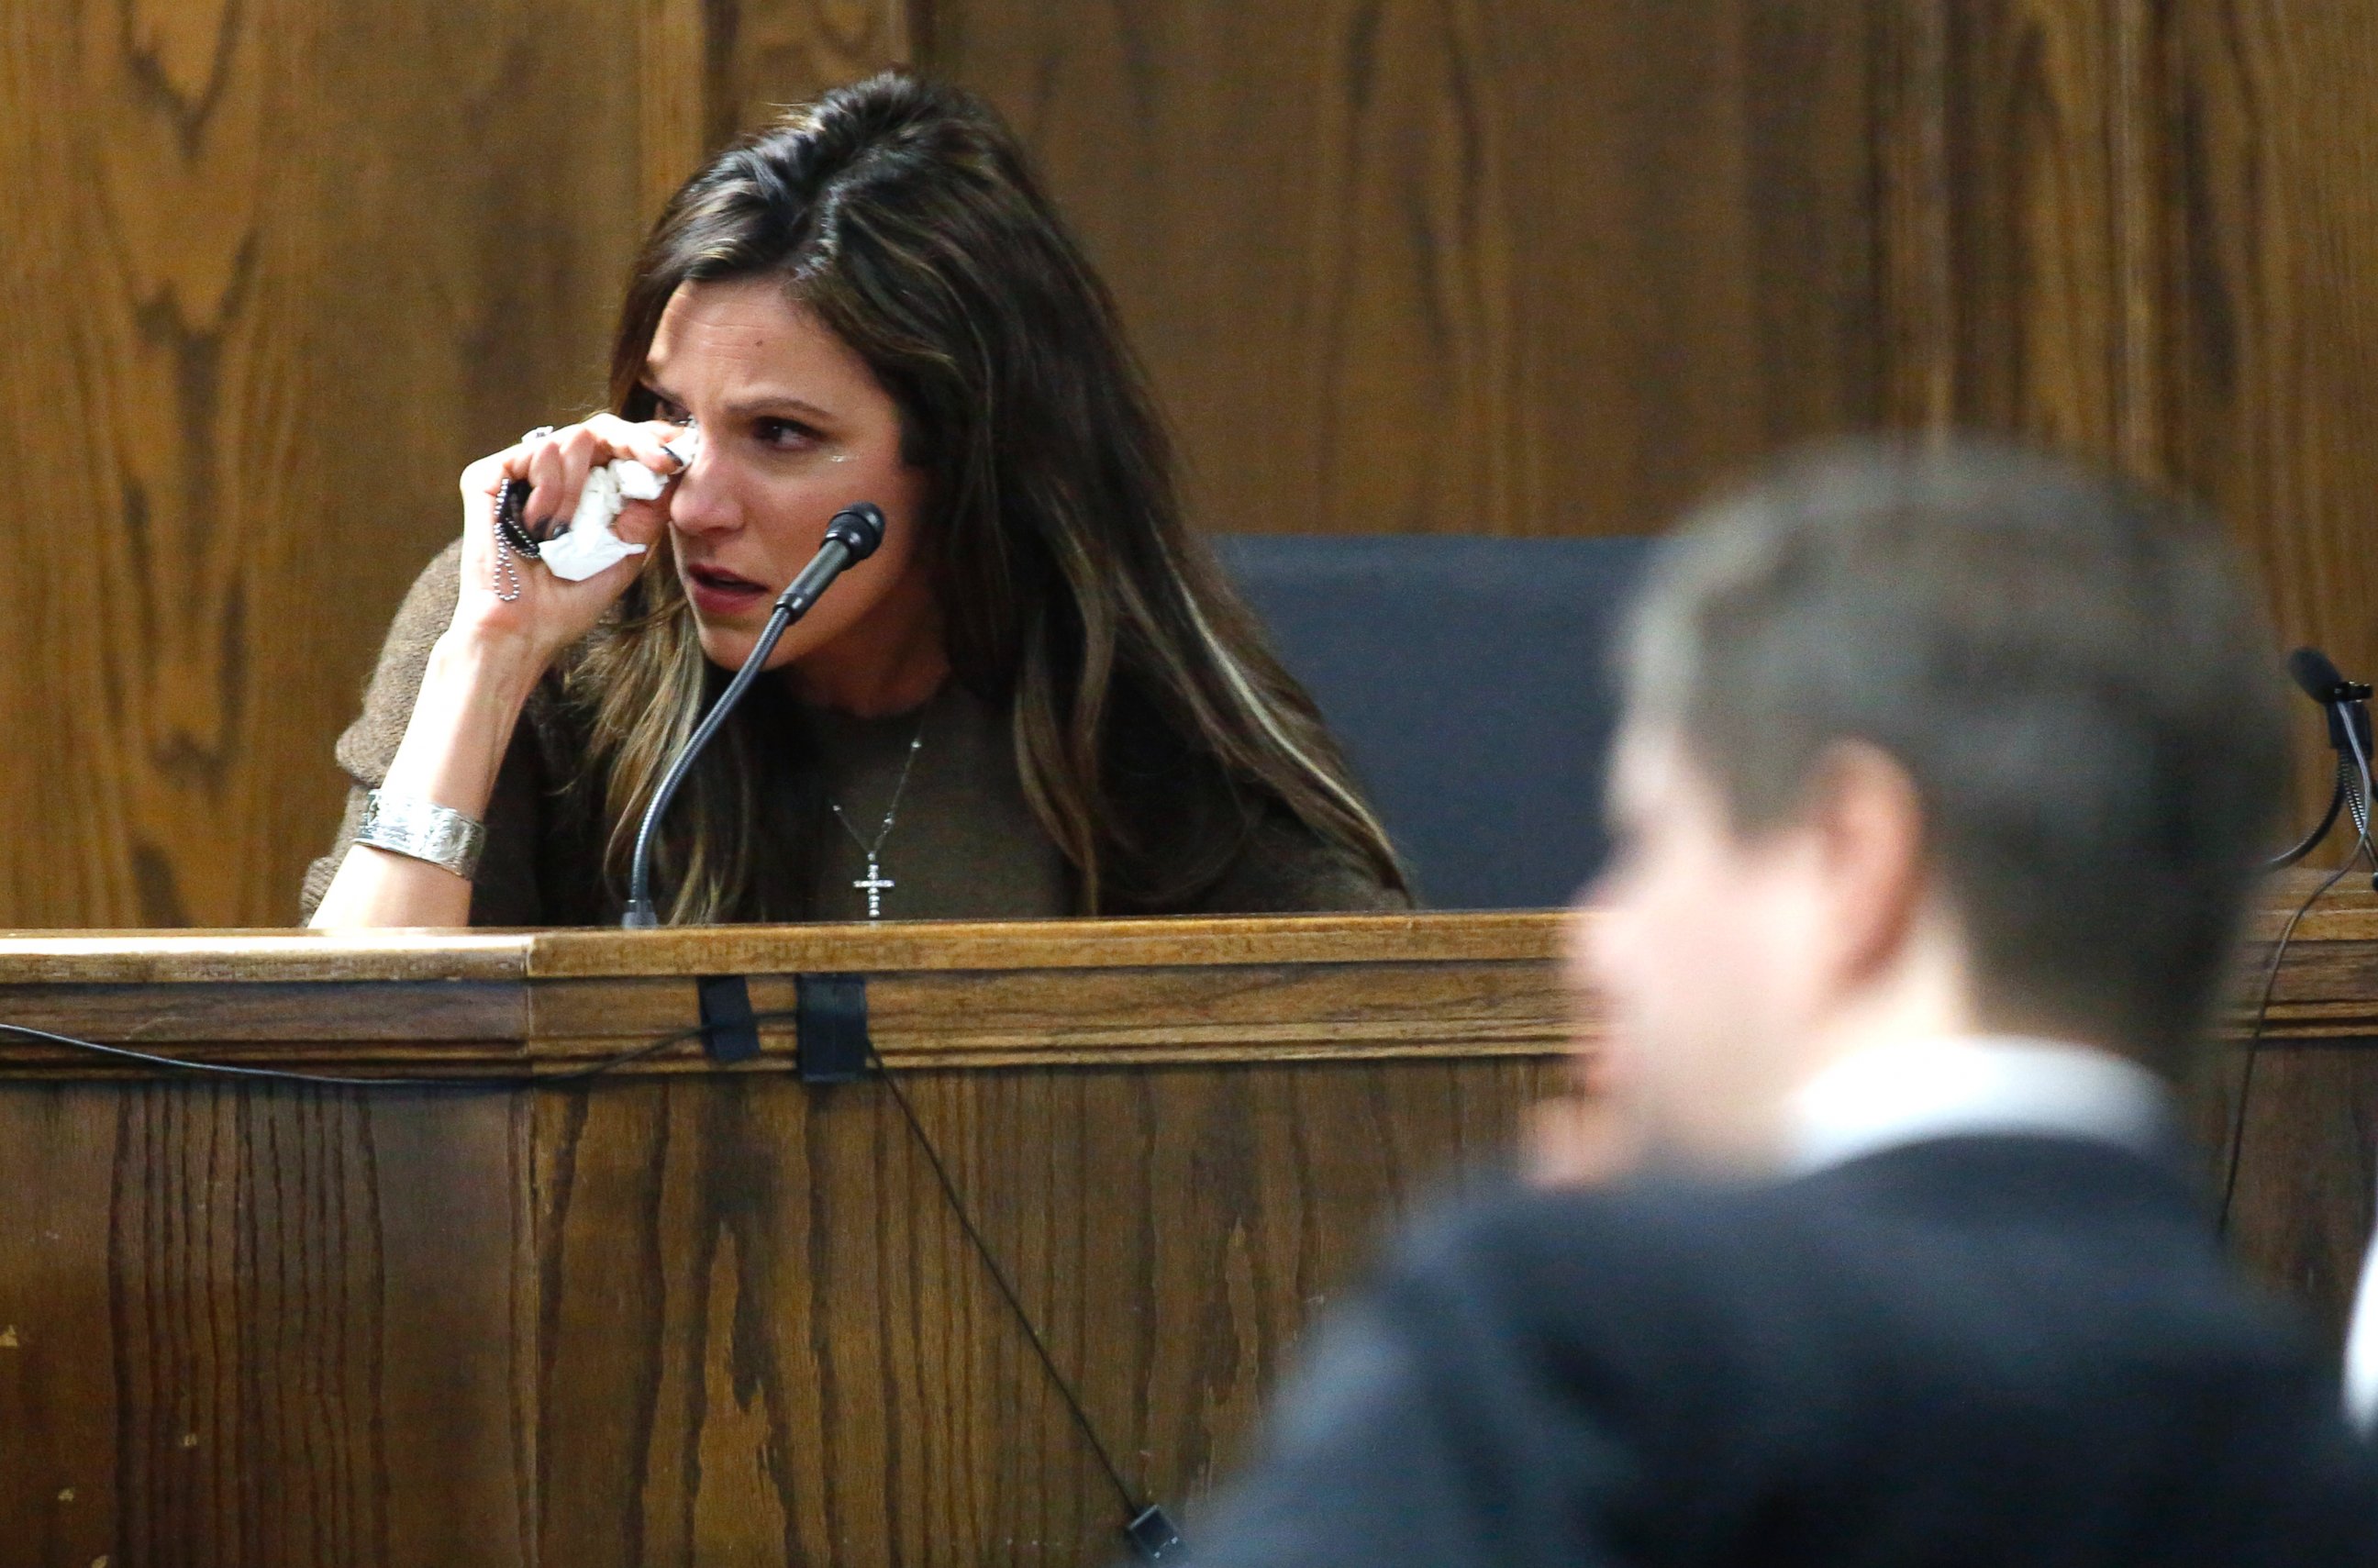 PHOTO: Tara Kyle cries on the stand during court inside the Erath County Donald R. Jones Justice Center during the murder trial for Eddie Ray Routh in Stephenville, Texas, Feb. 11, 2015.